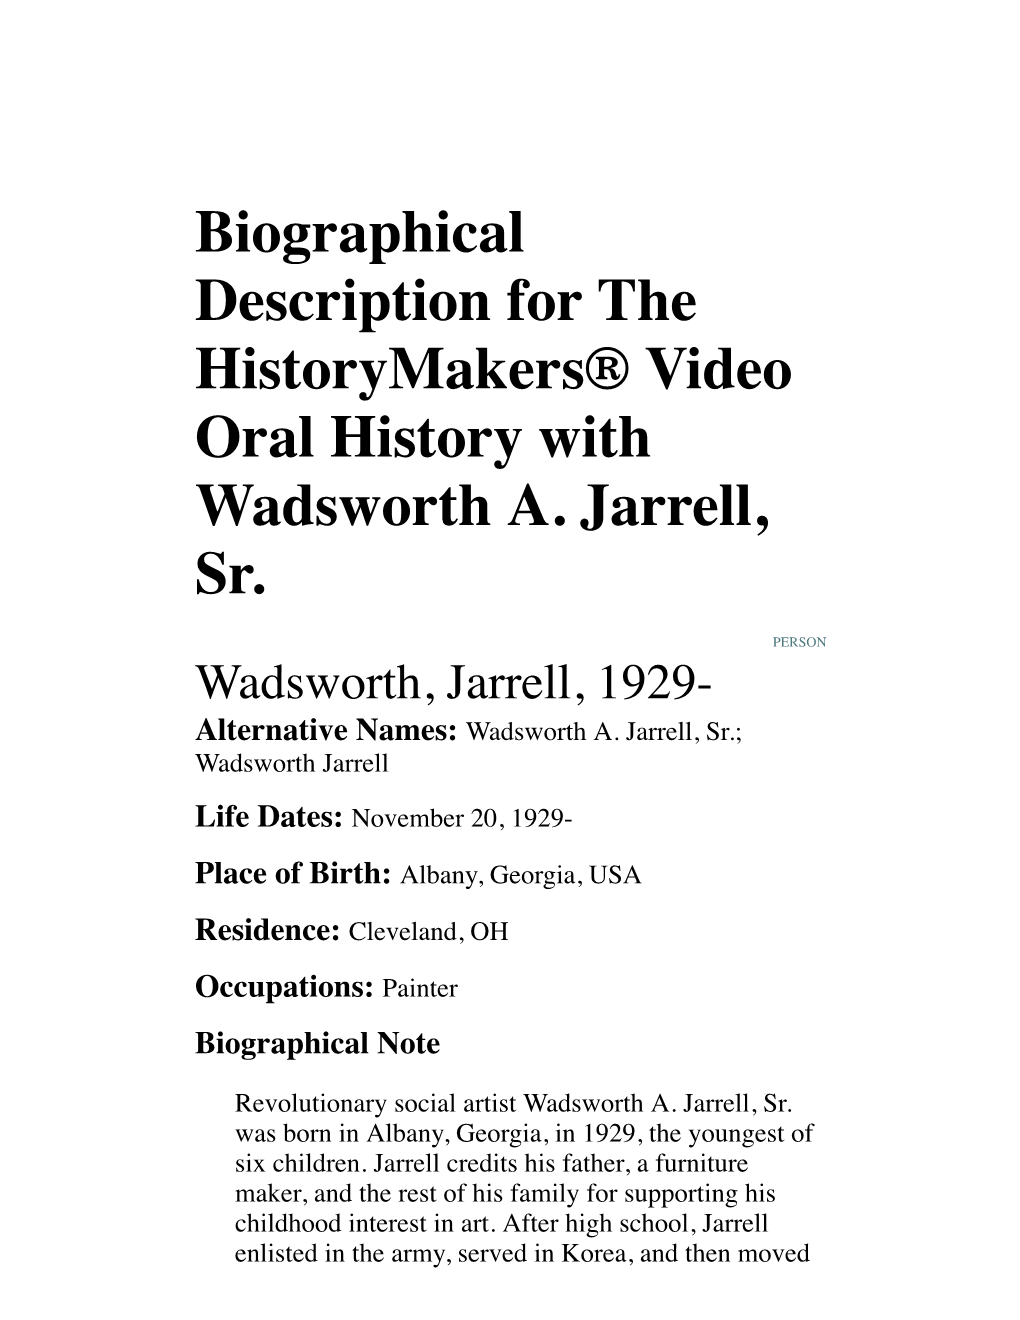 Biographical Description for the Historymakers® Video Oral History with Wadsworth A